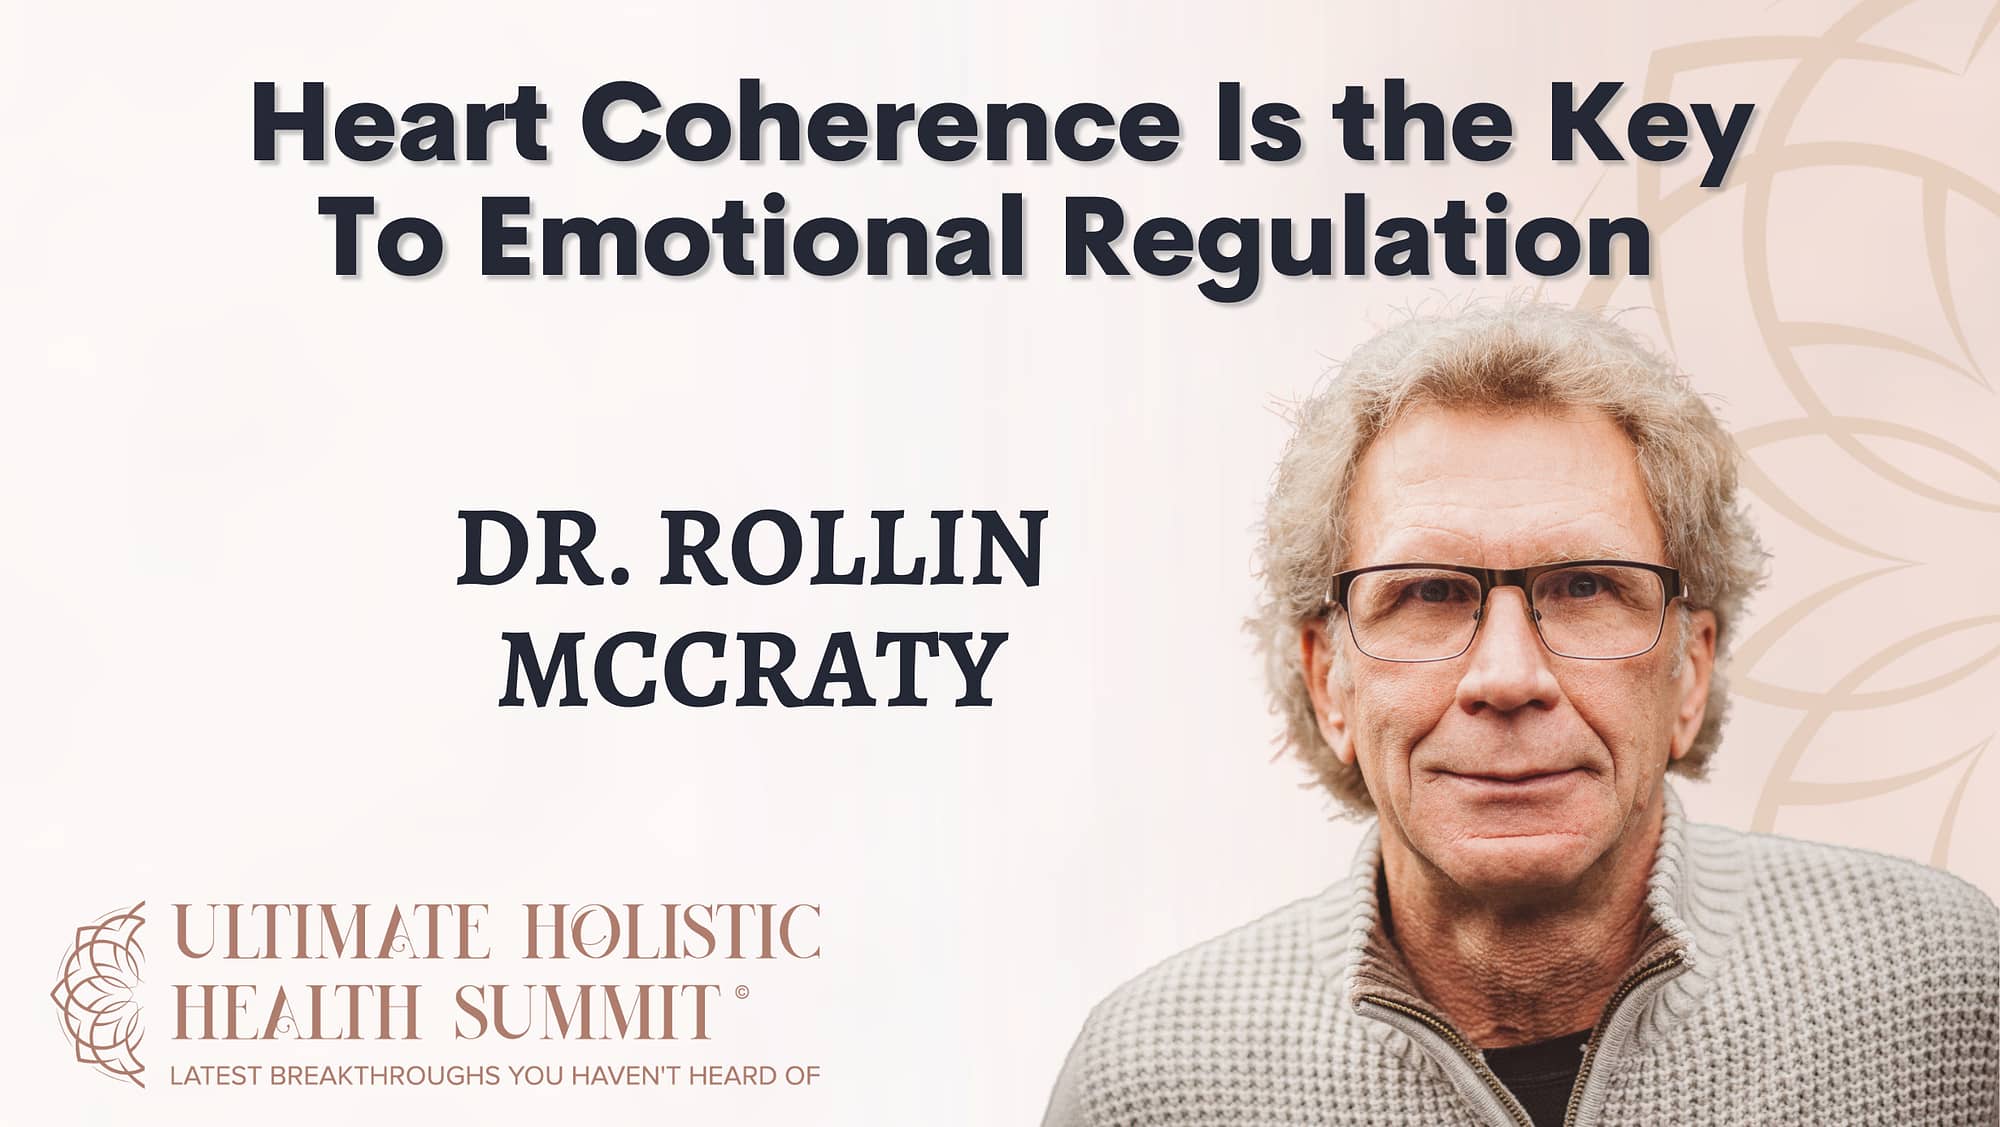 Heart Coherence Is the Key to Emotional Regulation